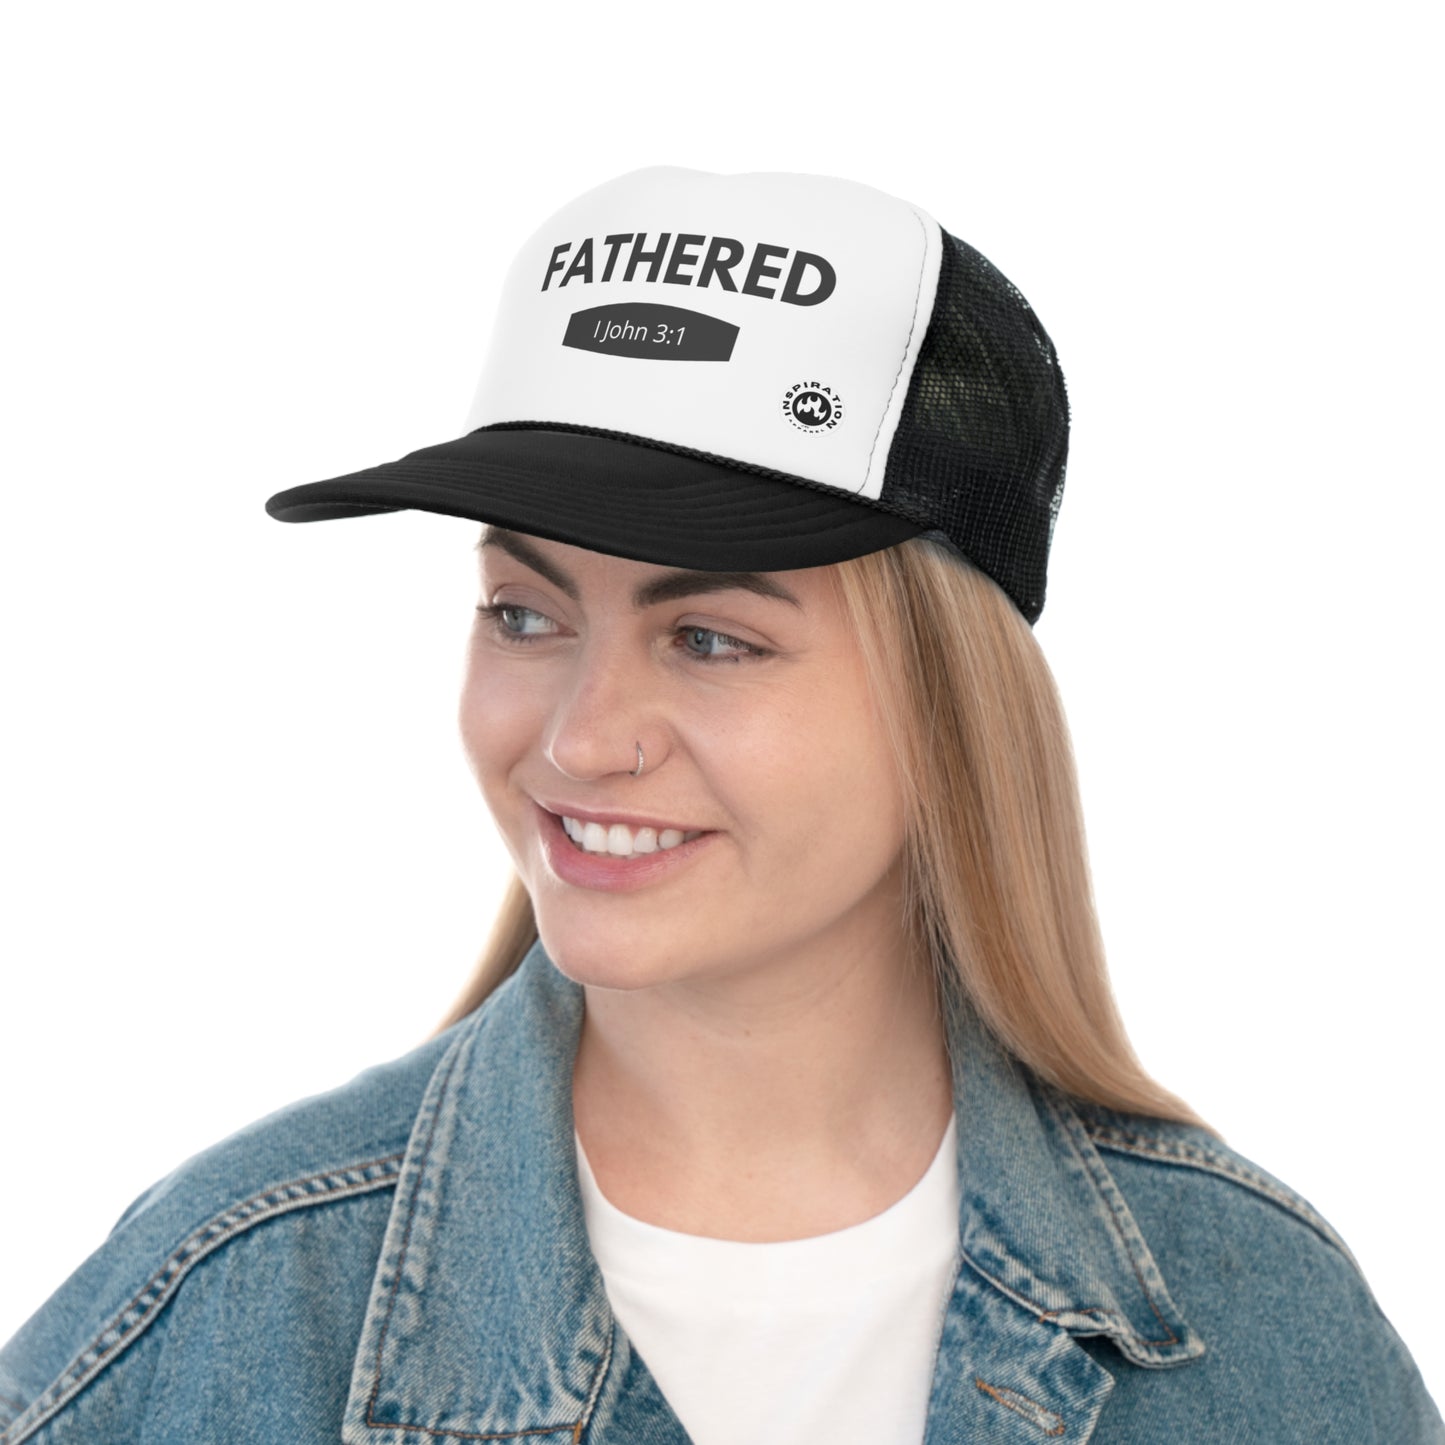 "Fathered" Trucker Caps